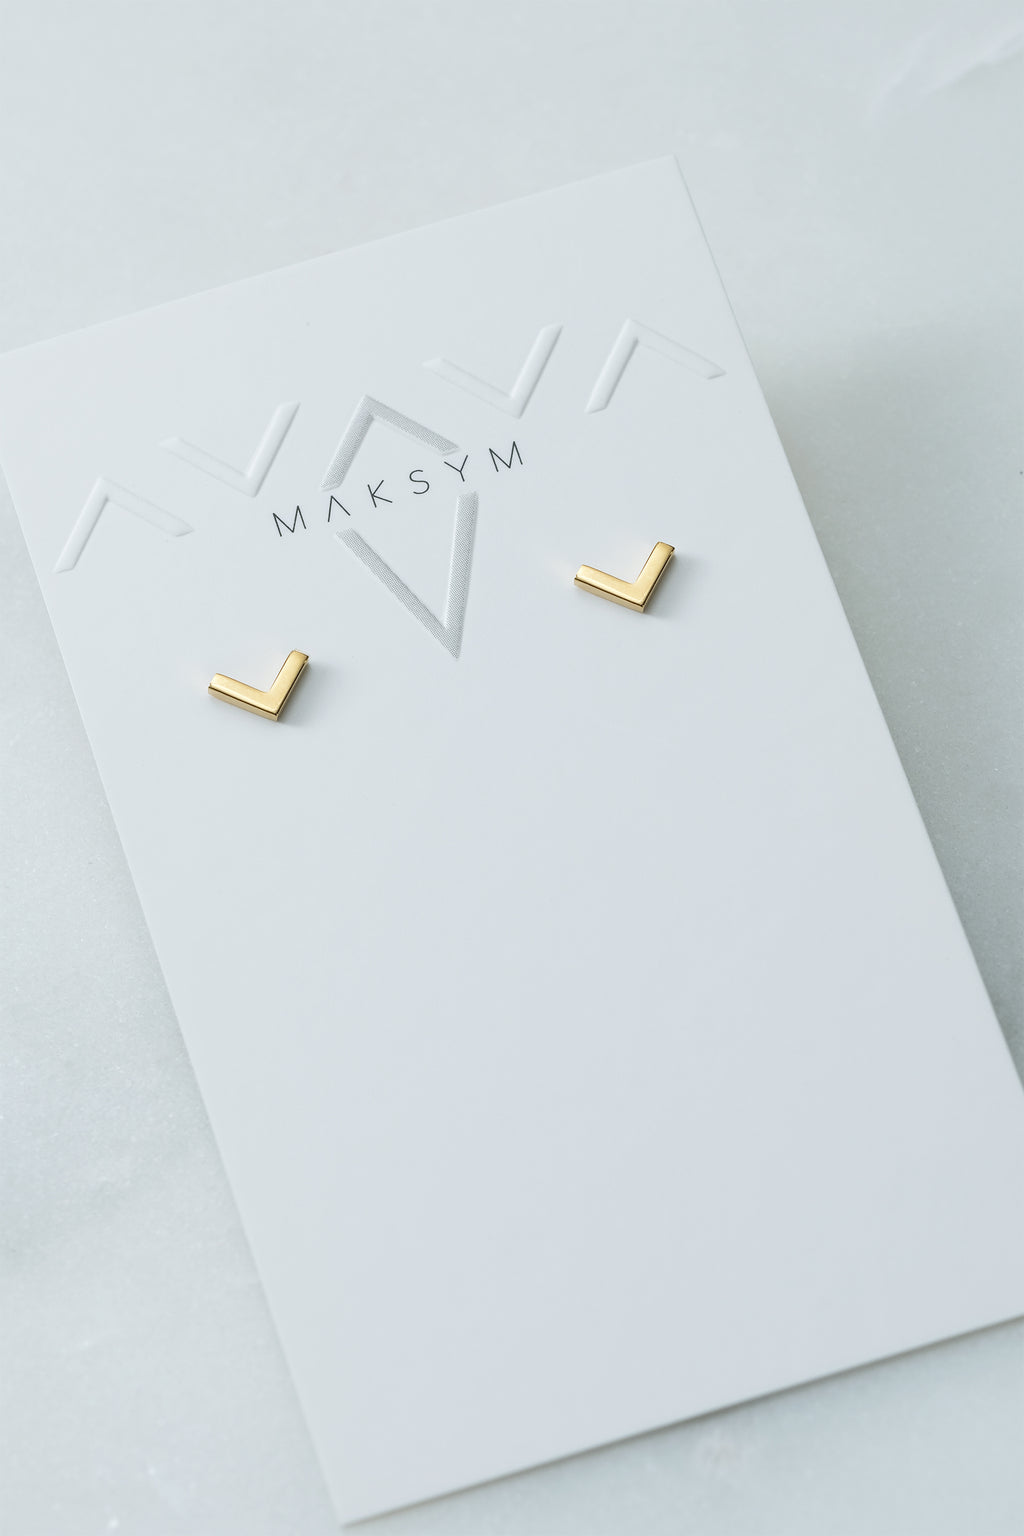 IMPERFECT - Small V earrings - Yellow gold